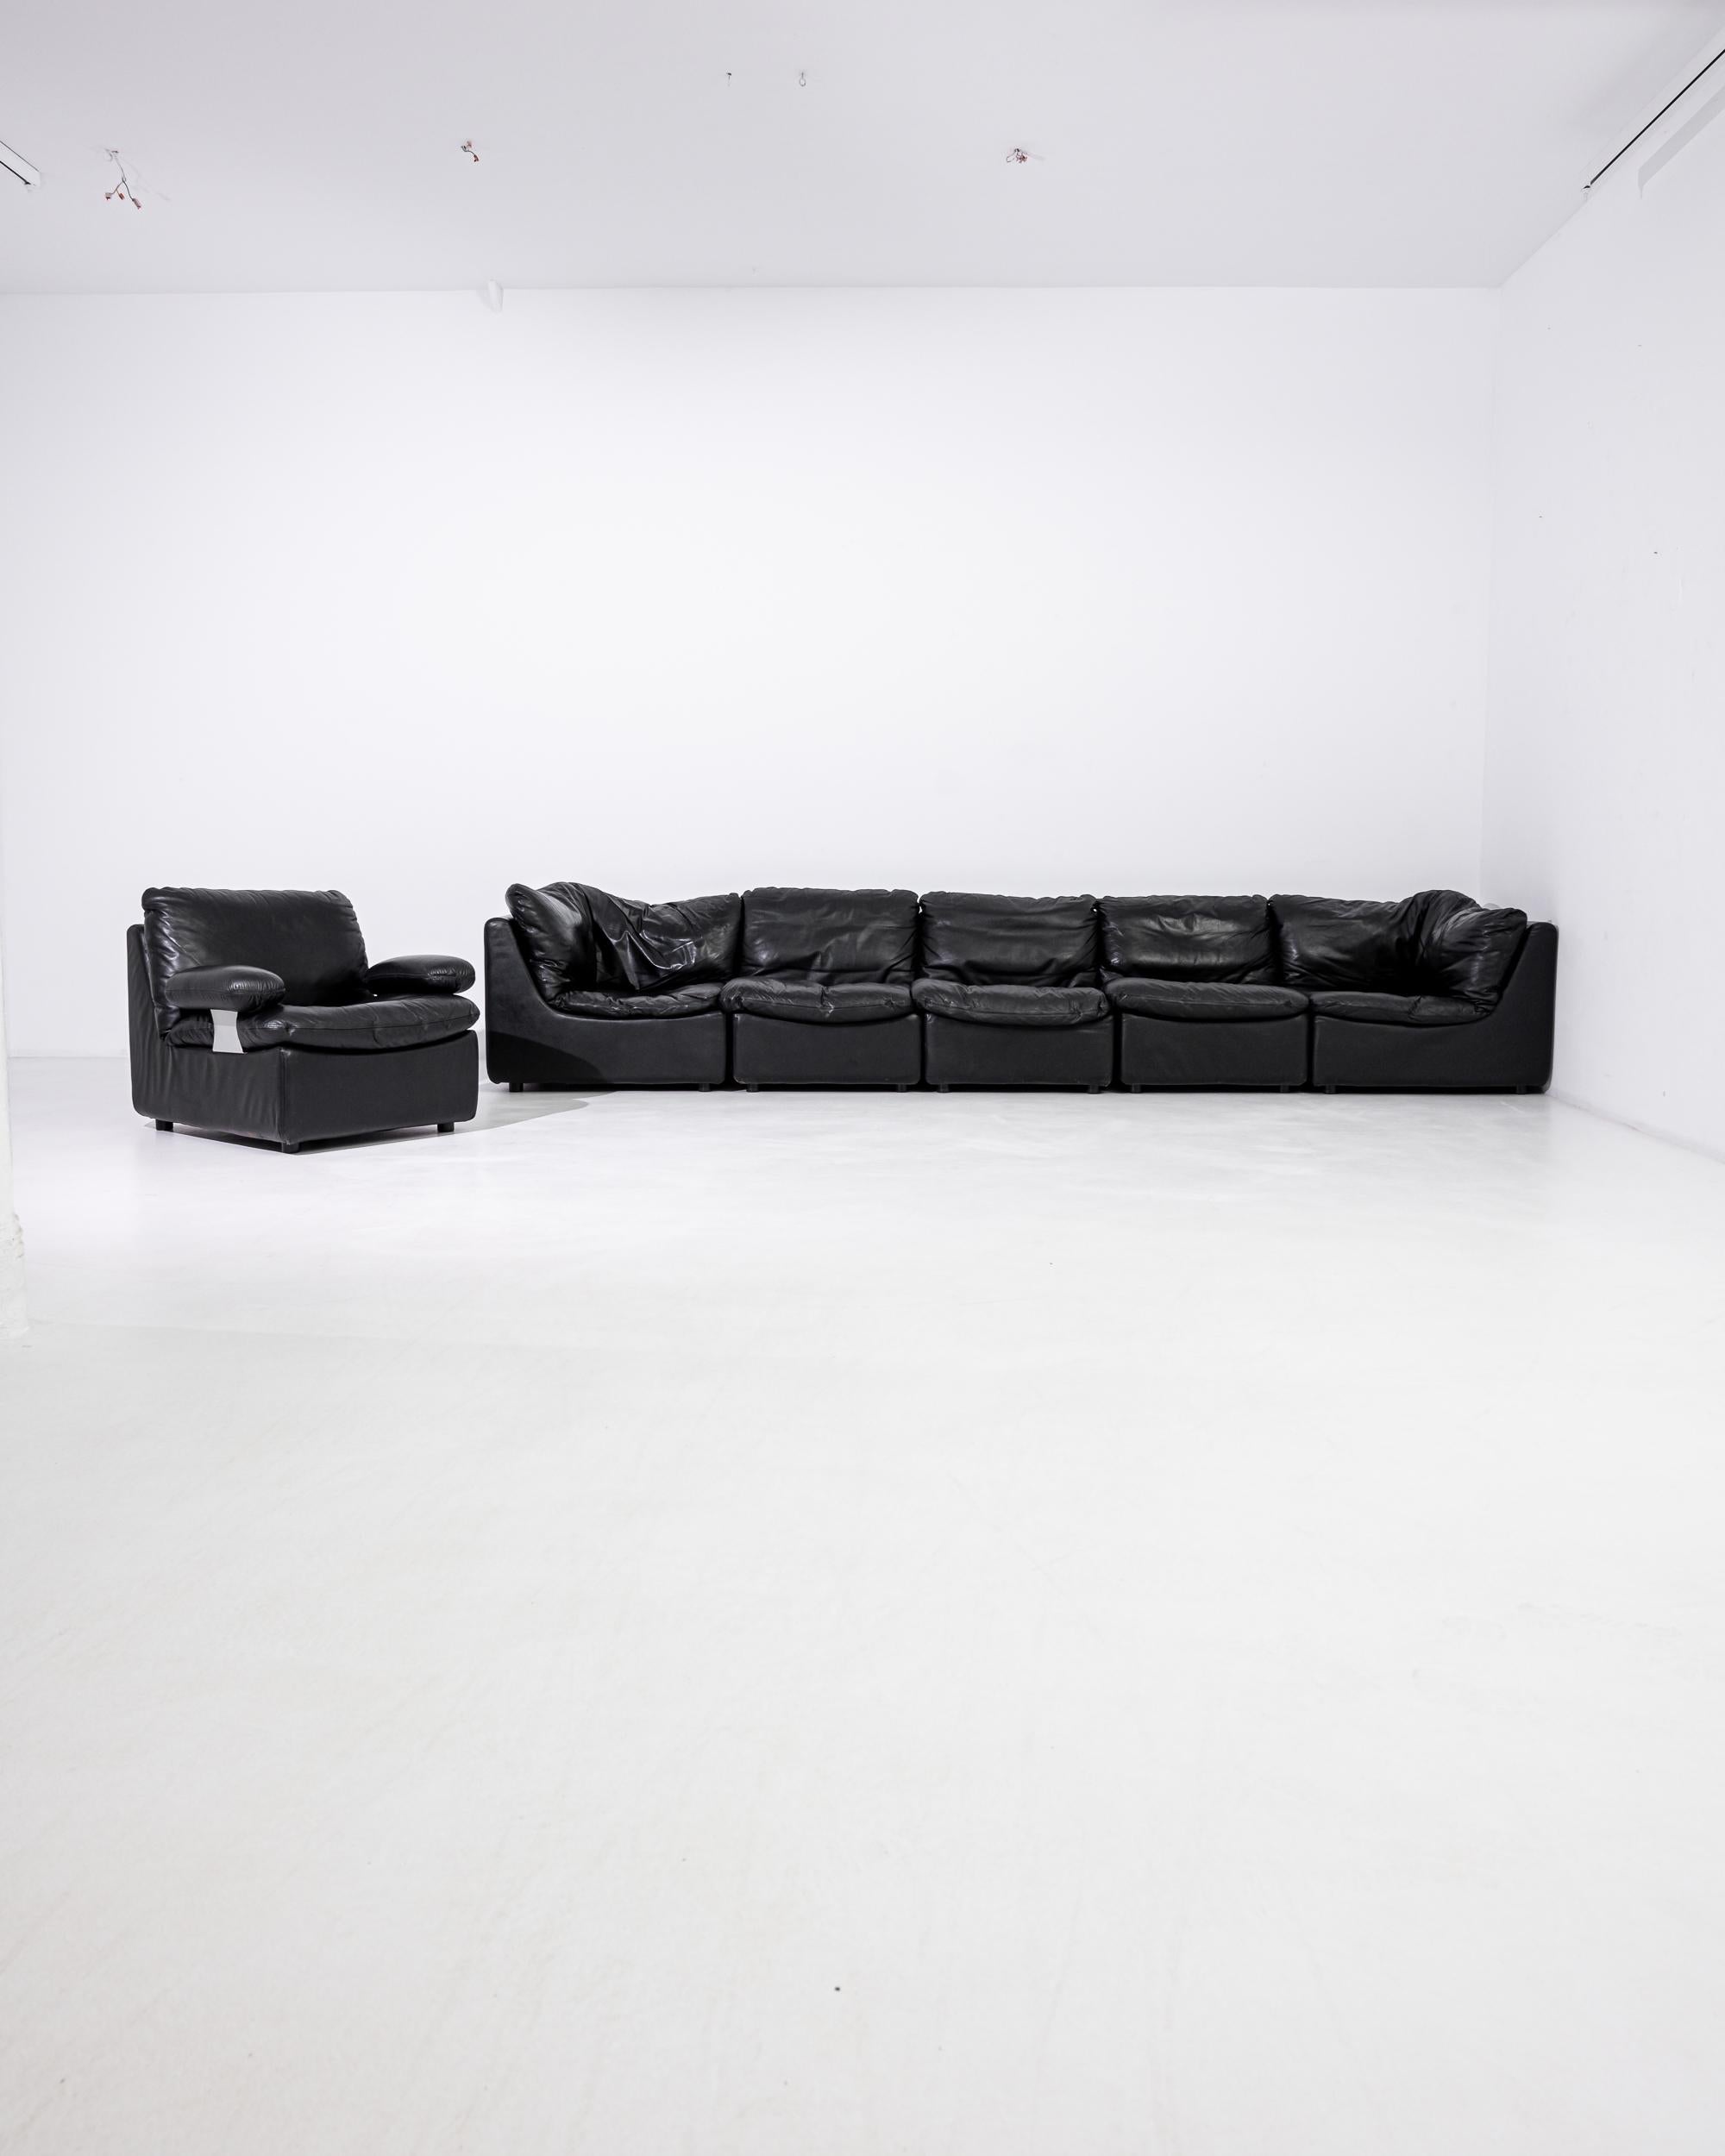 Seductively comfortable, this vintage modular sofa made in Germany features five units with one individual armchair. Upholstered in classy black leather, the modules have soft puffy cushions and a leather-clad frame that gently curves on the